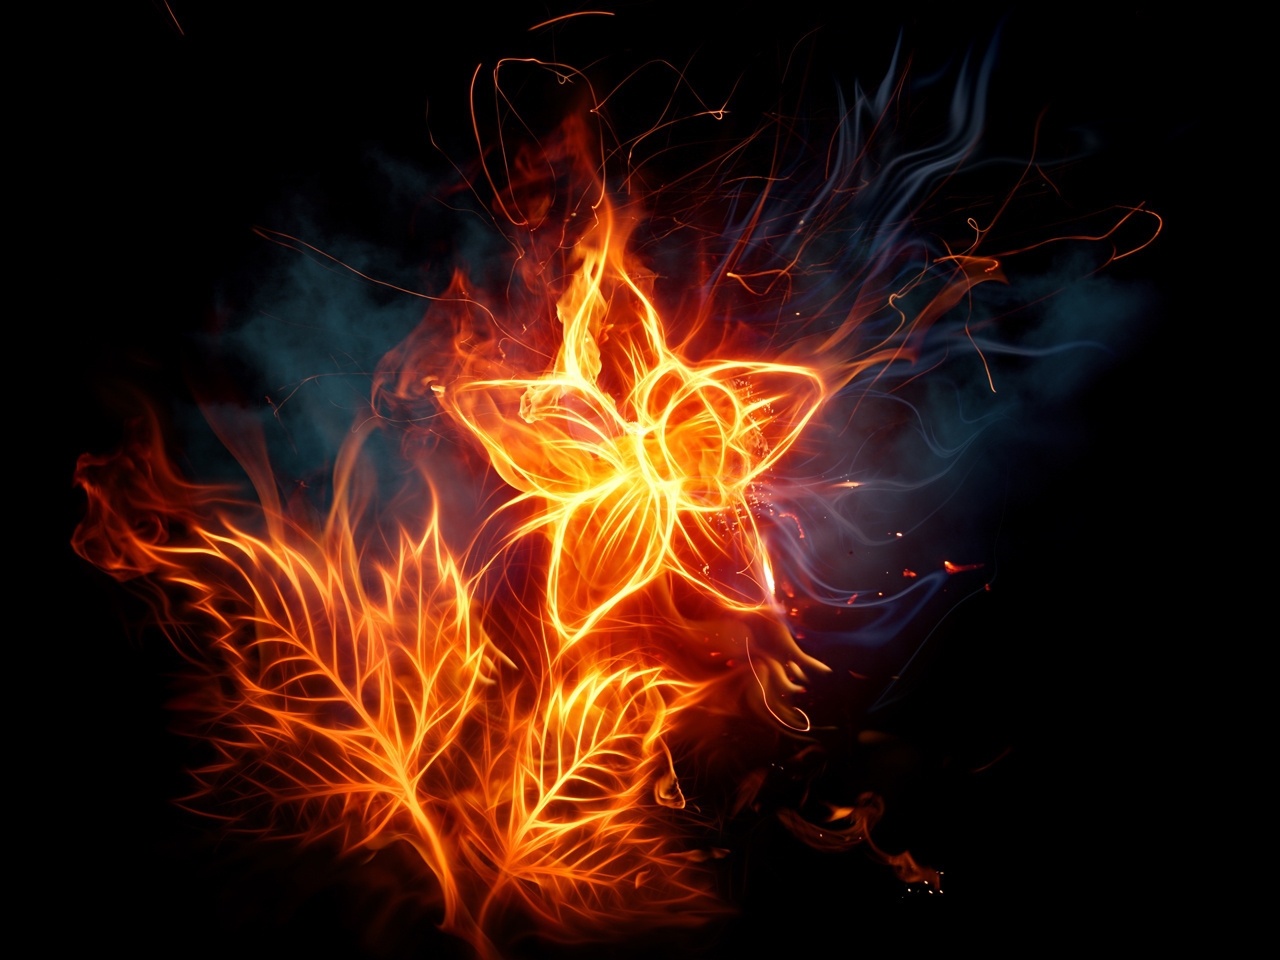 32512 download wallpaper fire, flowers, background screensavers and pictures for free